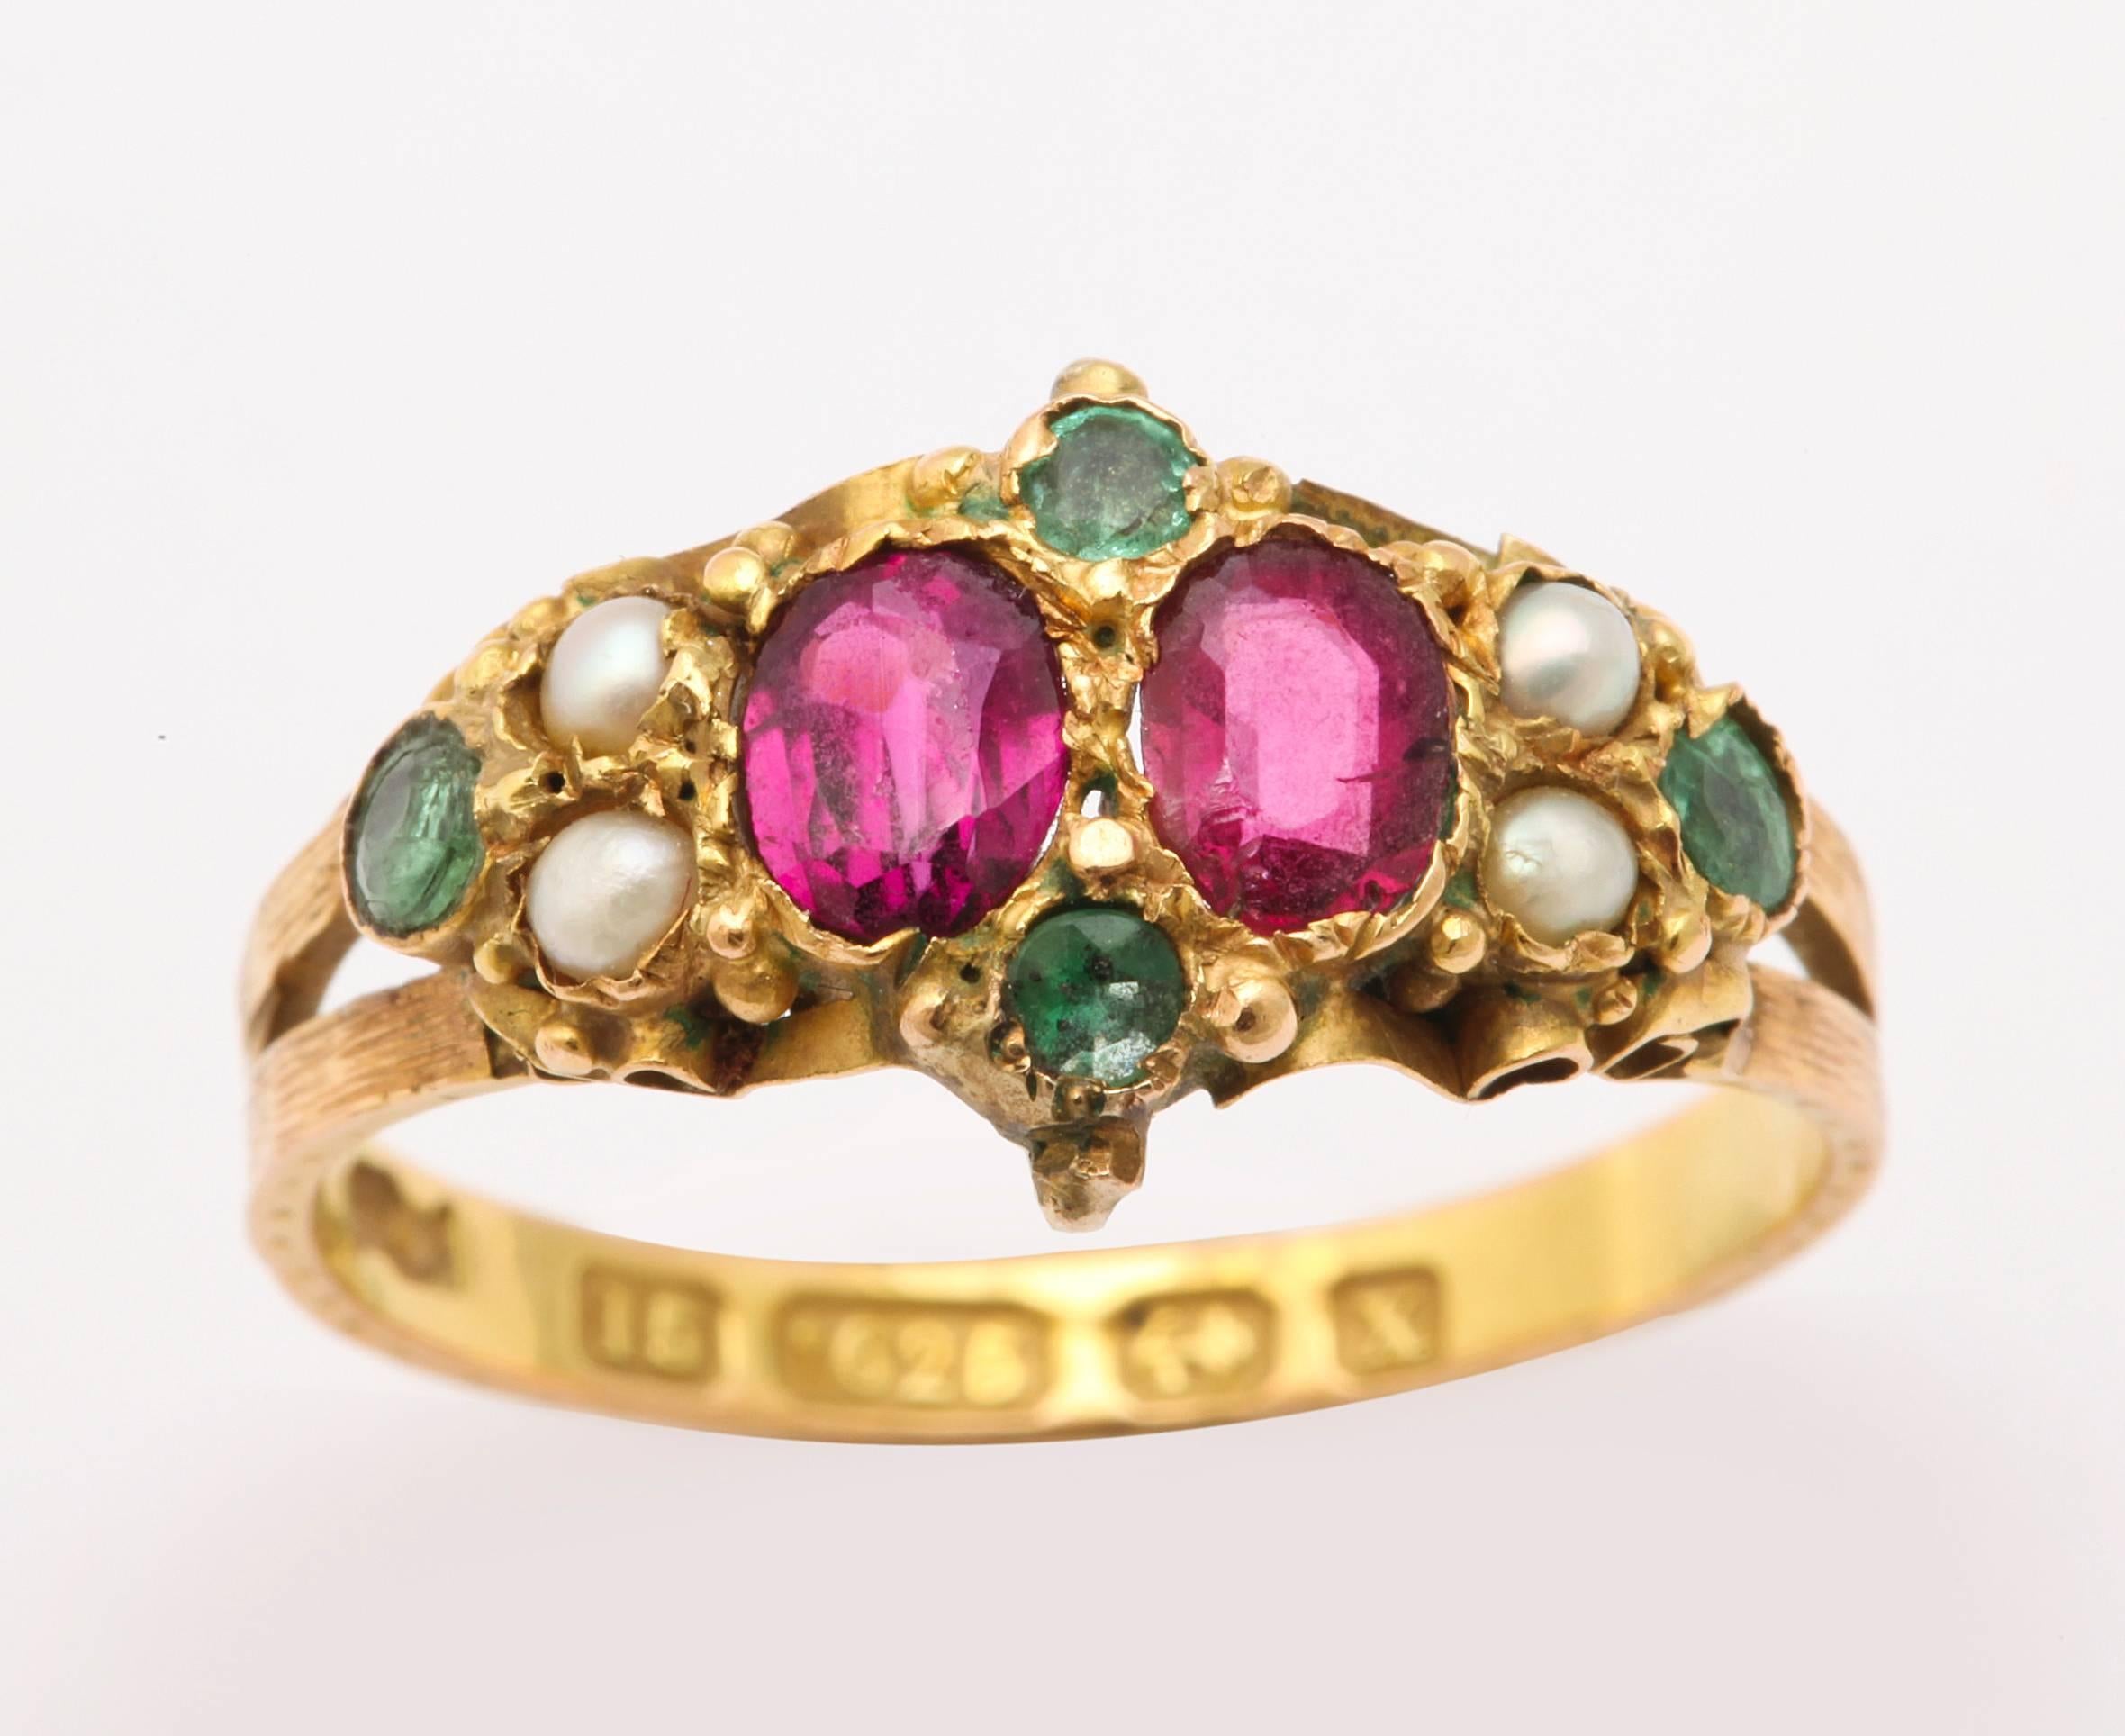 Luscious colors of ruby, emerald and pearl are marvelous neighbors in this Victorian 15kt gold ring c. 1840. The gems are foiled as was the manner at this time. The colors, nonetheless are intense. The bifurcated shank is ridged and narrows to a